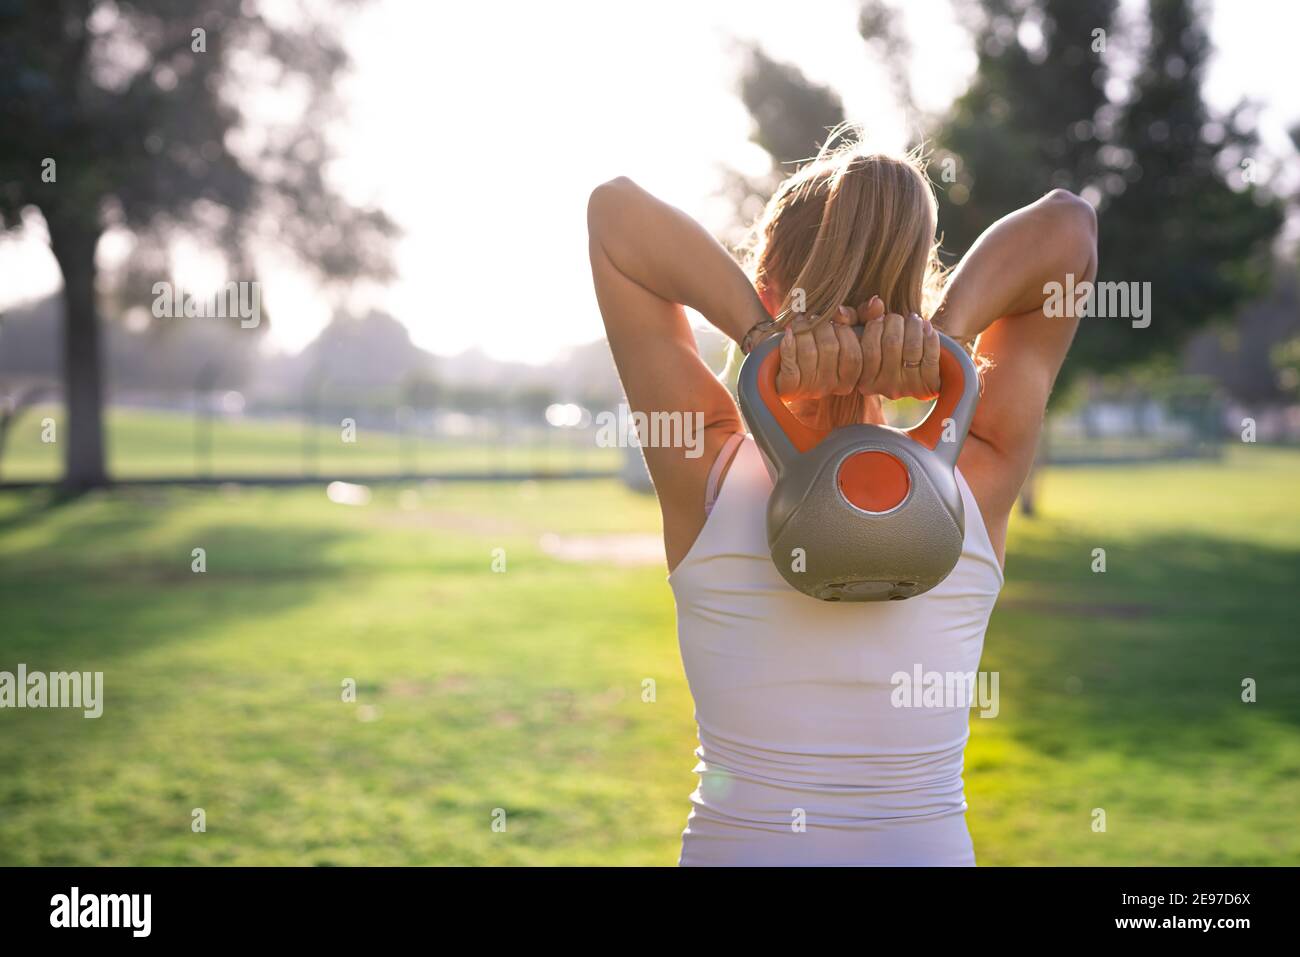 A youthful woman engages in exercises amidst the greenery of the park, dressed in pink yoga pants, and positioned on a yoga mat. Stock Photo